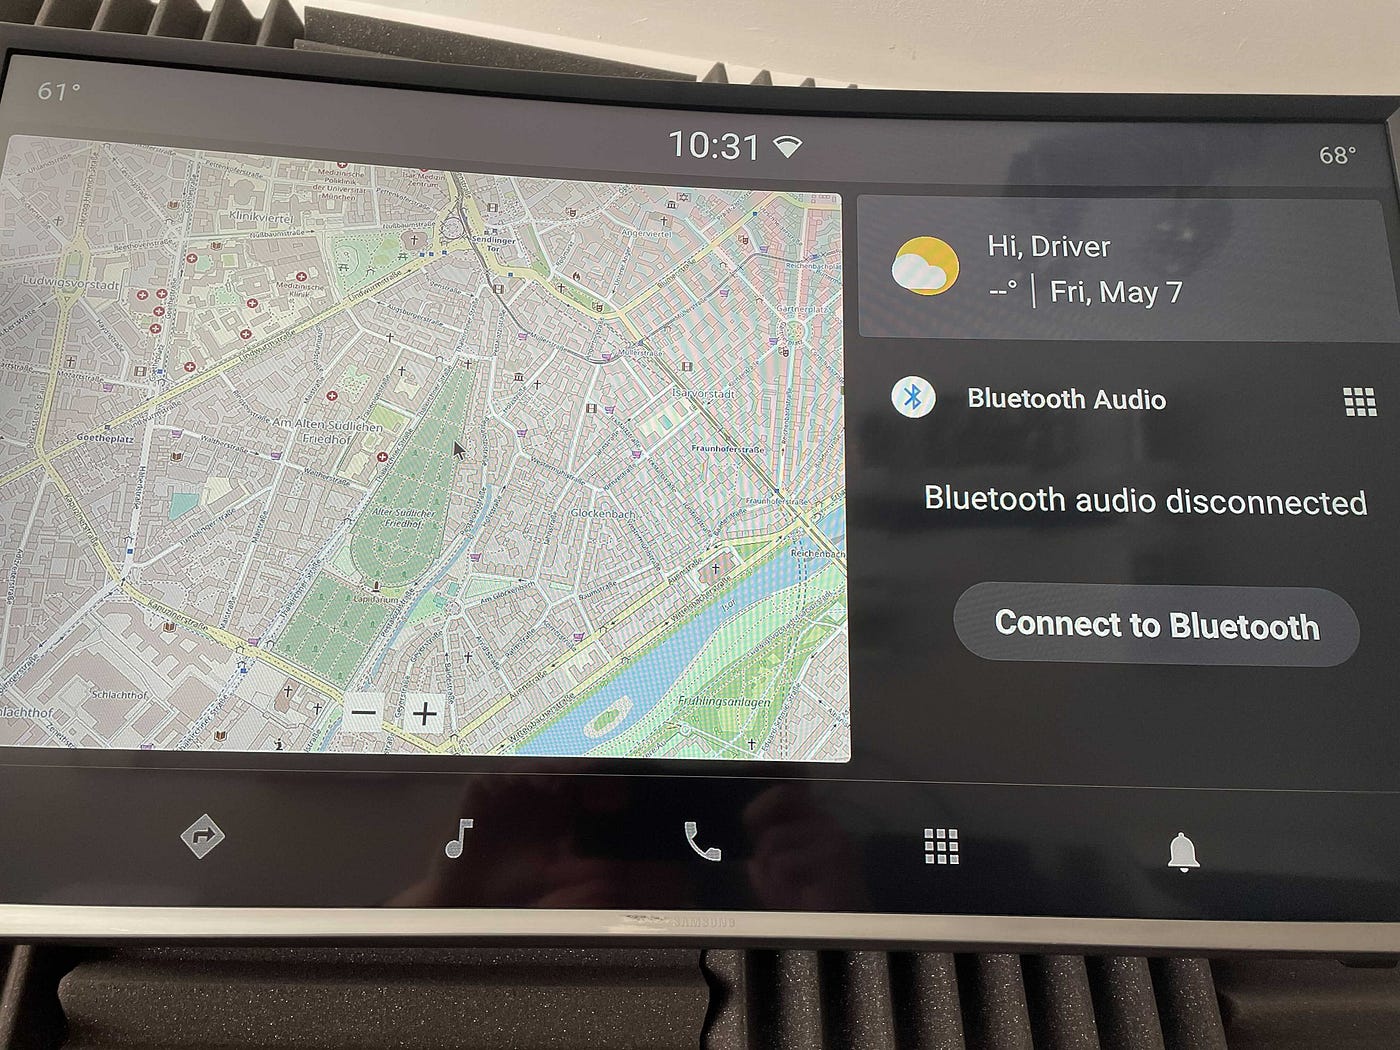 Android Automotive OS 11 USB image for the Raspberry Pi 4B | by Al Sutton |  Snapp Automotive | Medium